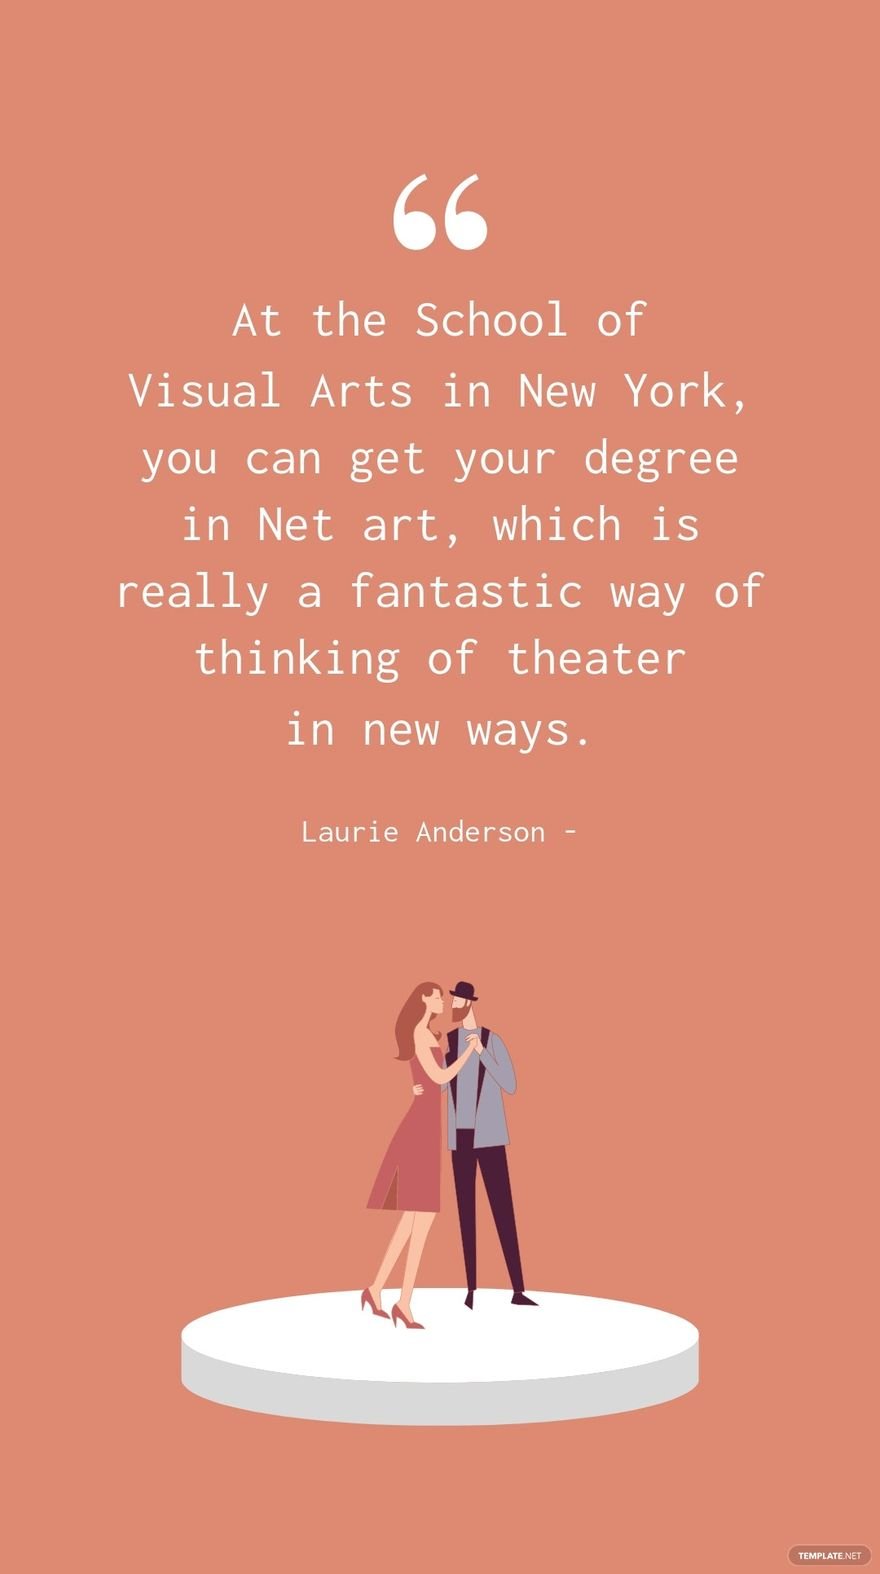 Laurie Anderson - At the School of Visual Arts in New York, you can get your degree in Net art, which is really a fantastic way of thinking of theater in new ways.